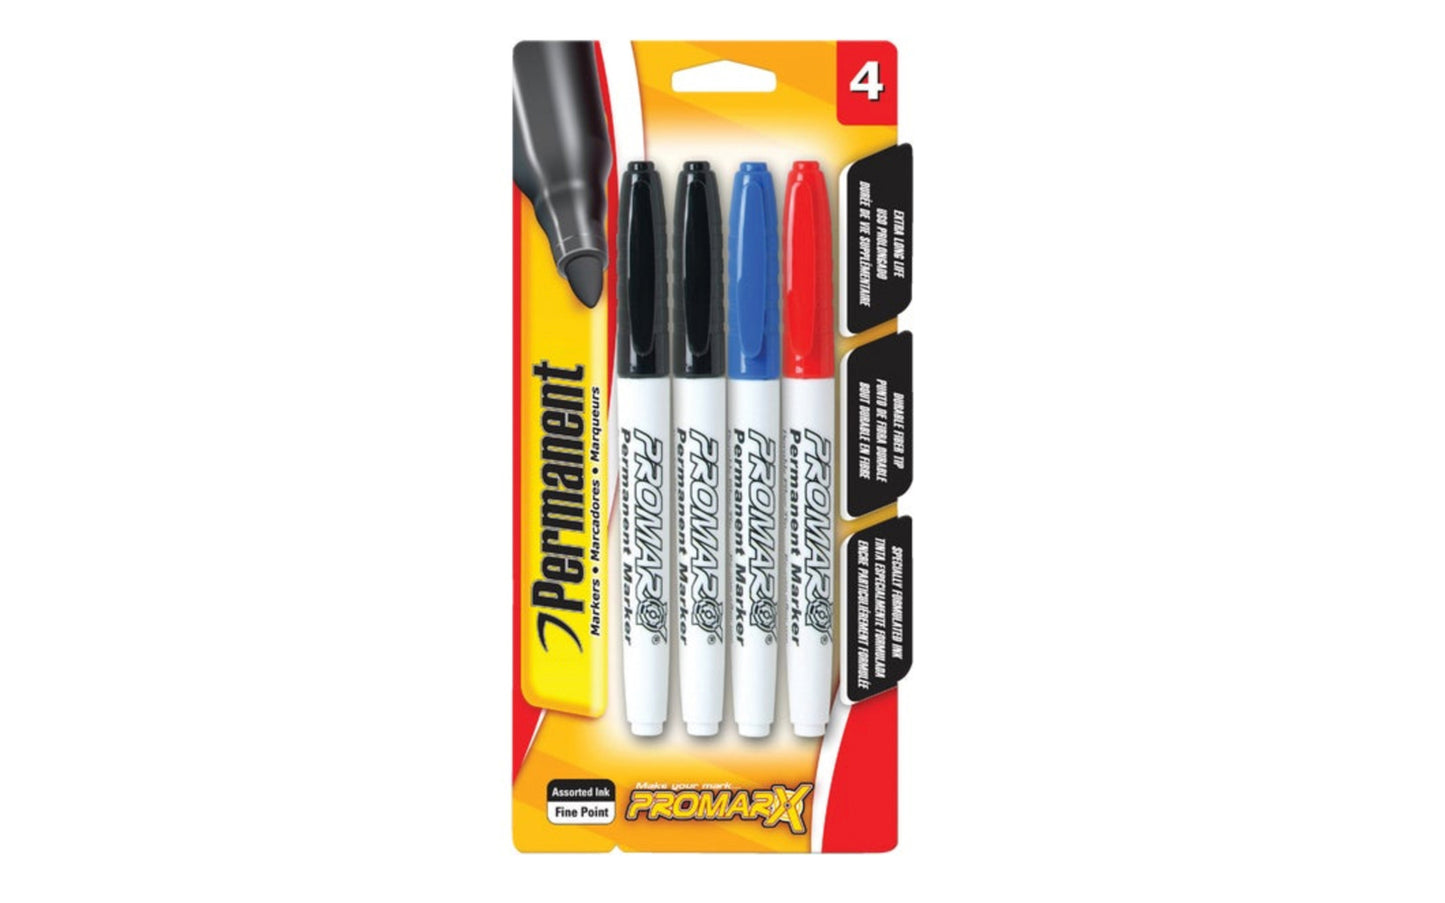 Promarx Assorted Colors Markers - 4 Pack. Permanent ink markers. Features extra long life, durable fiber tip, and specially formulated ink.